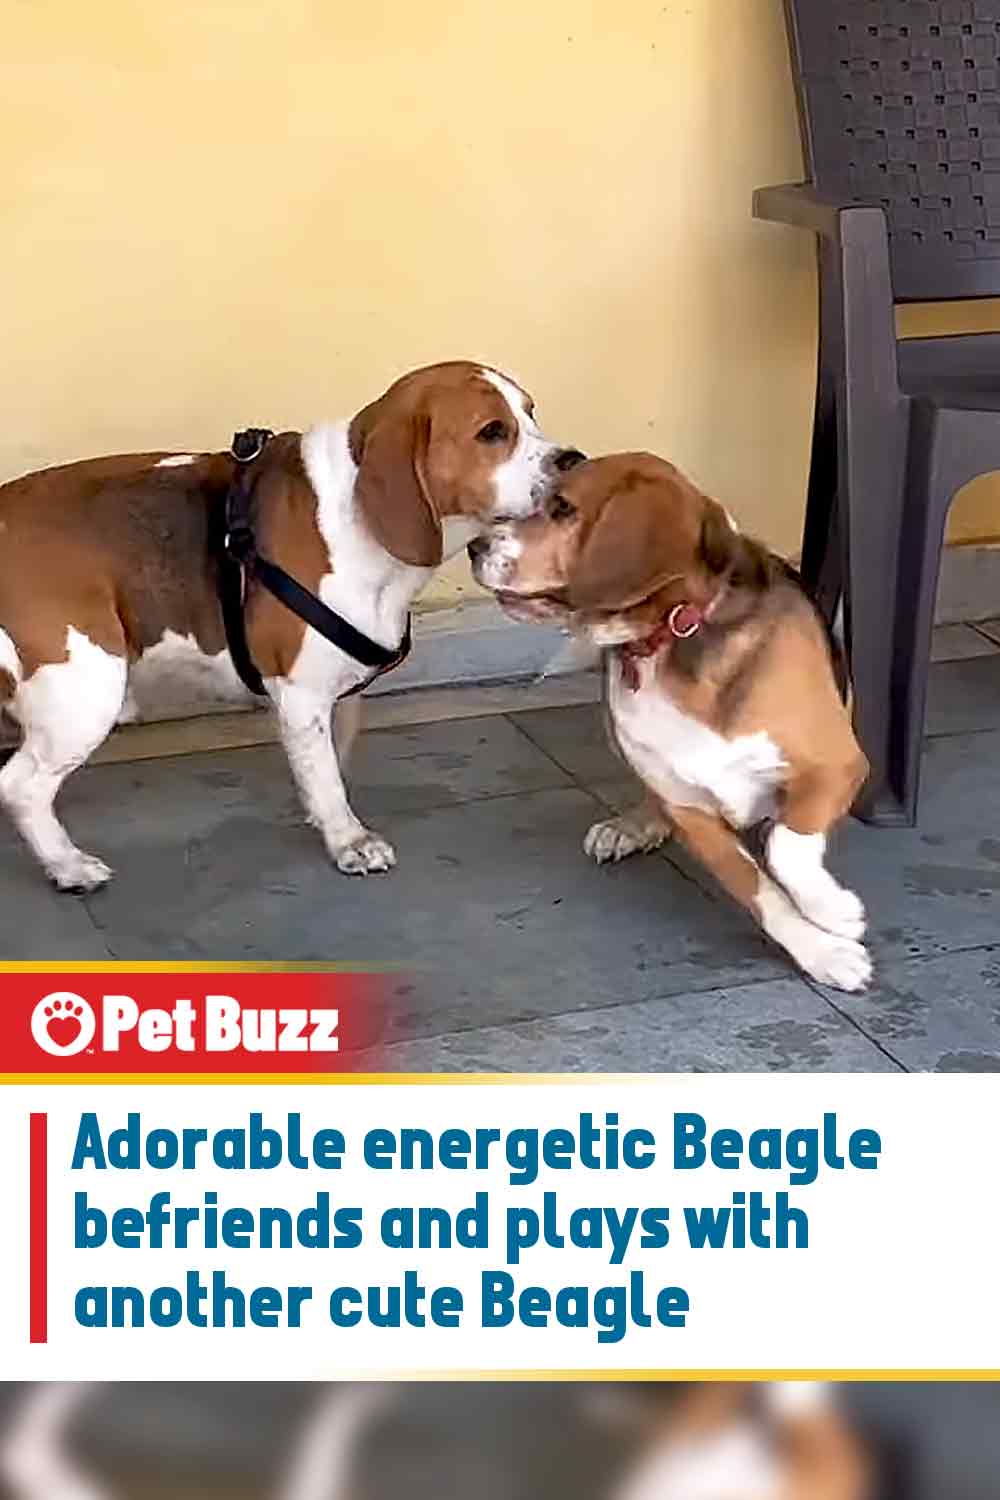 Adorable energetic Beagle befriends and plays with another cute Beagle